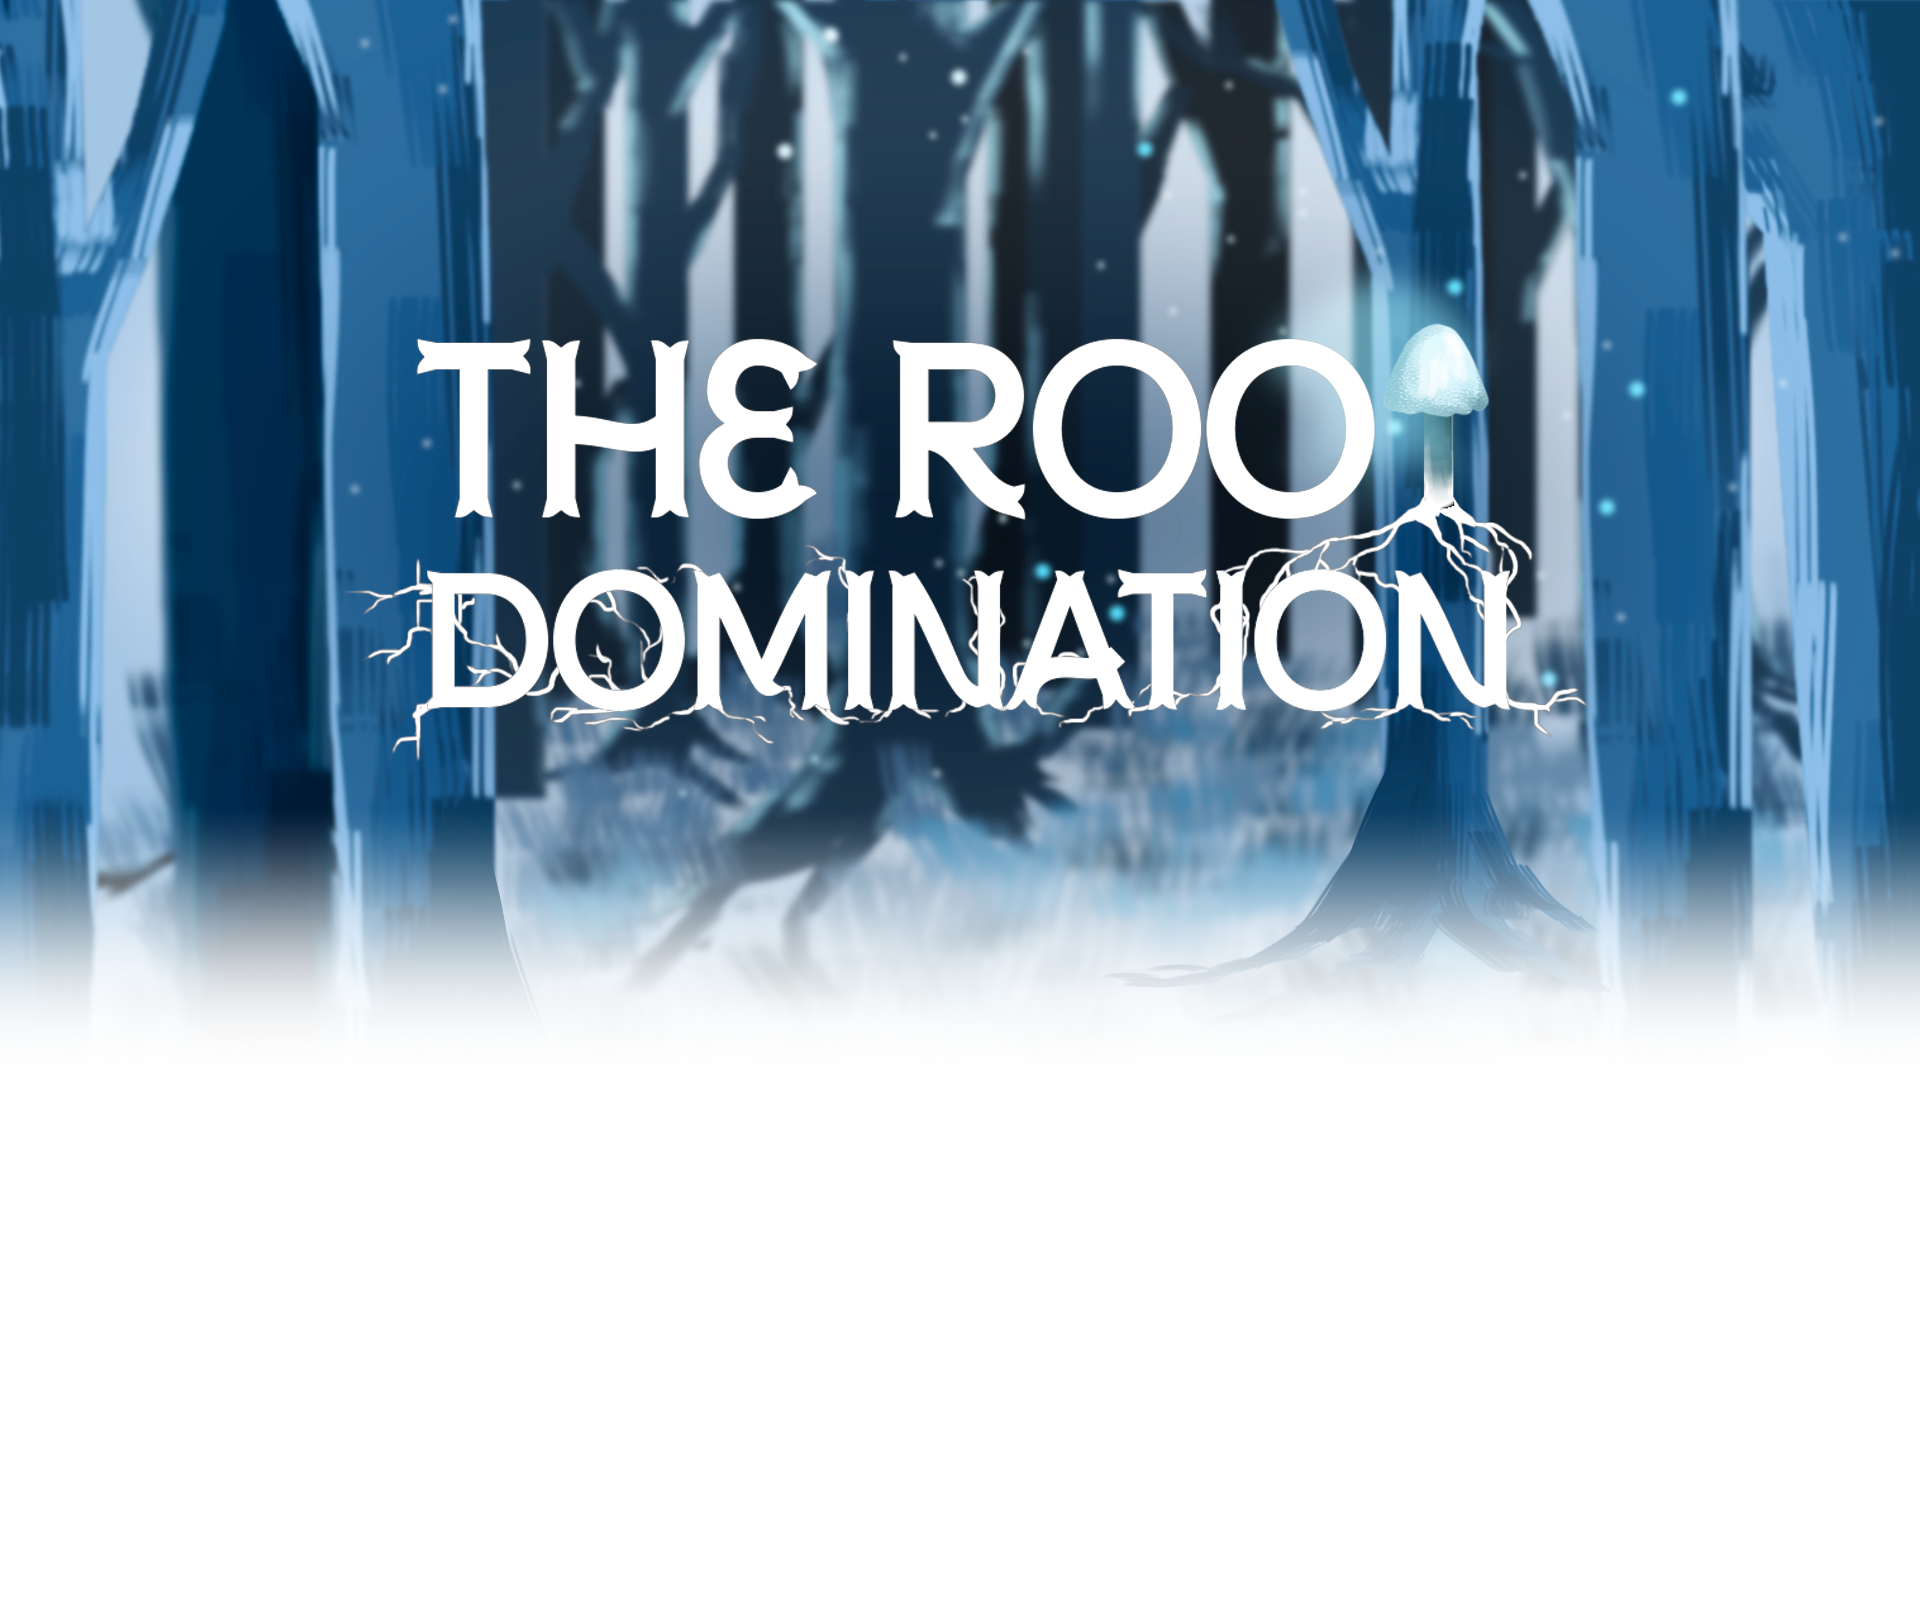 THE ROOT DOMINATION